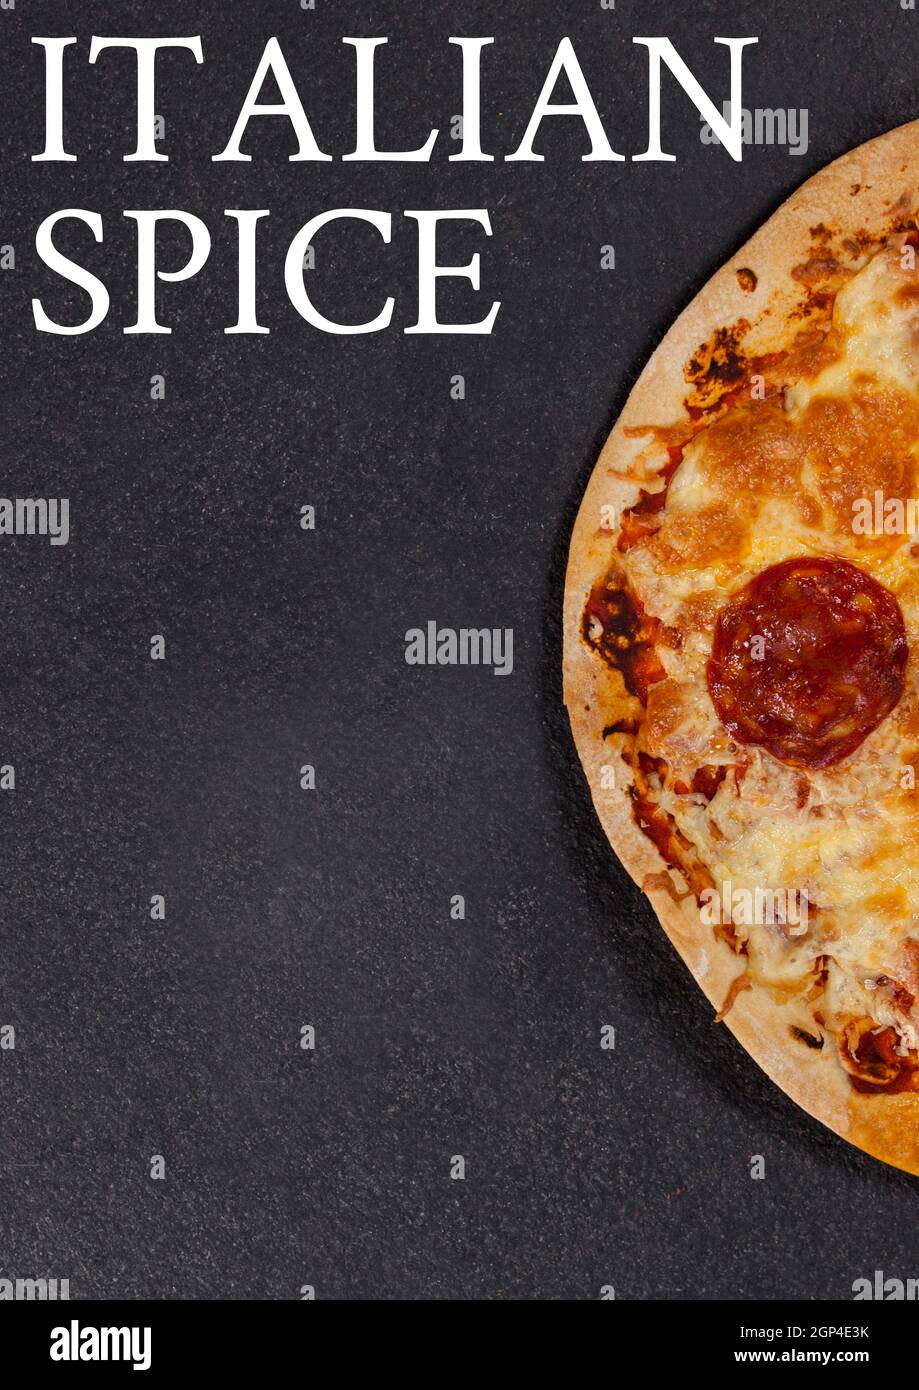 Composition of italian spice text and fresh pizza on gray background Stock Photo